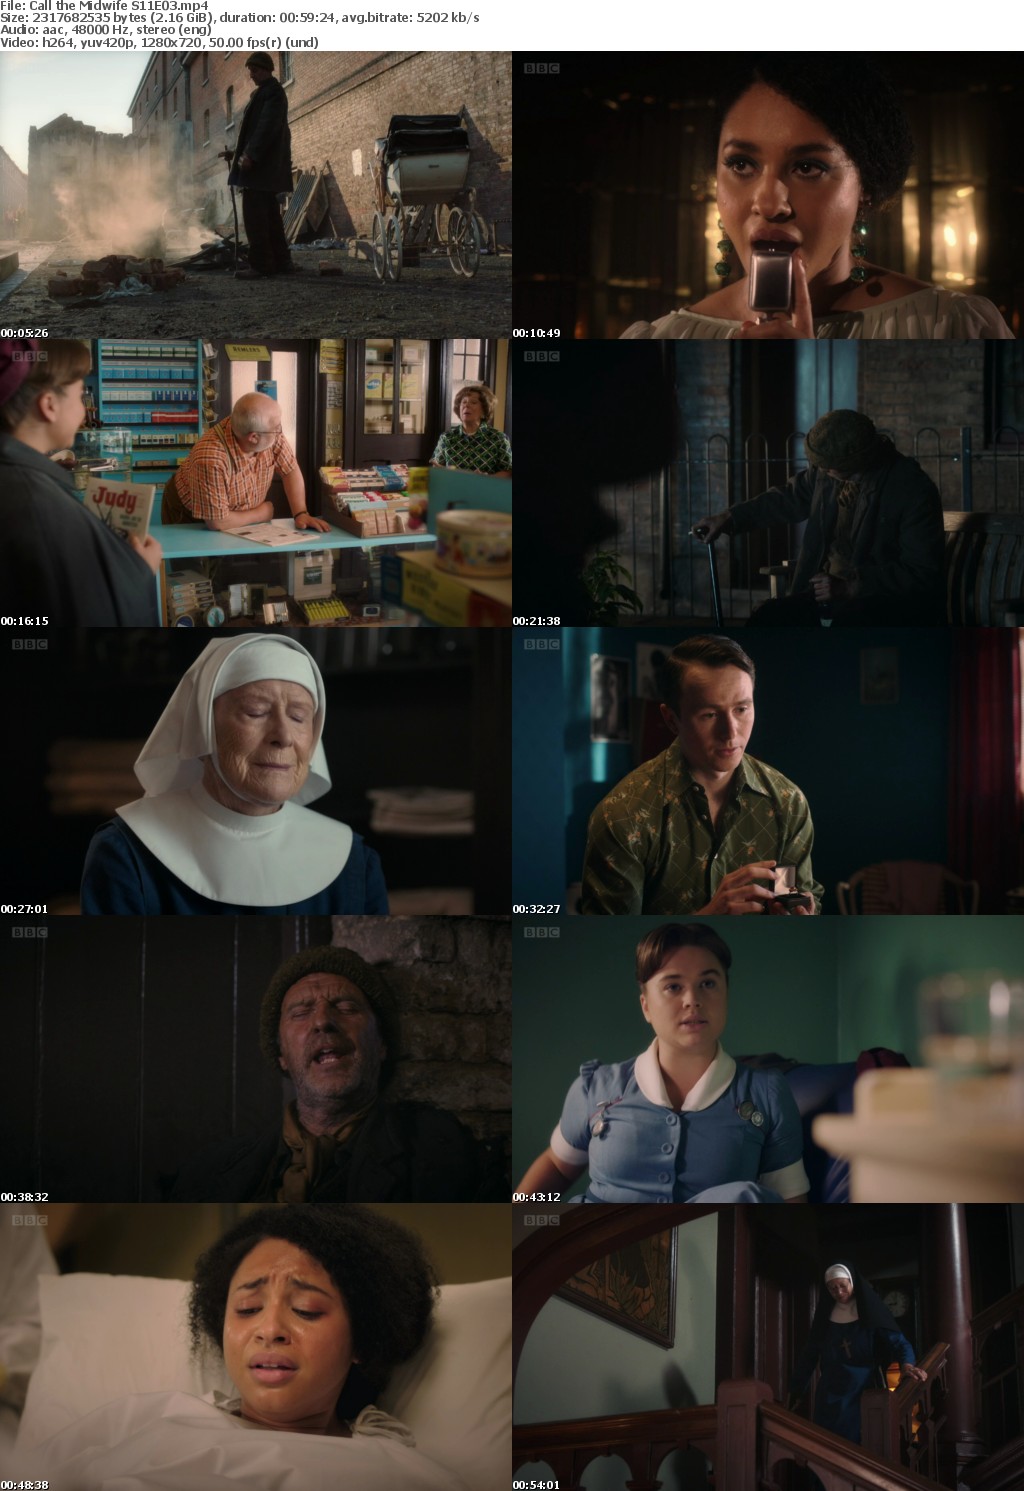 Call the Midwife S11E03 (1280x720p HD, 50fps, soft Eng subs)